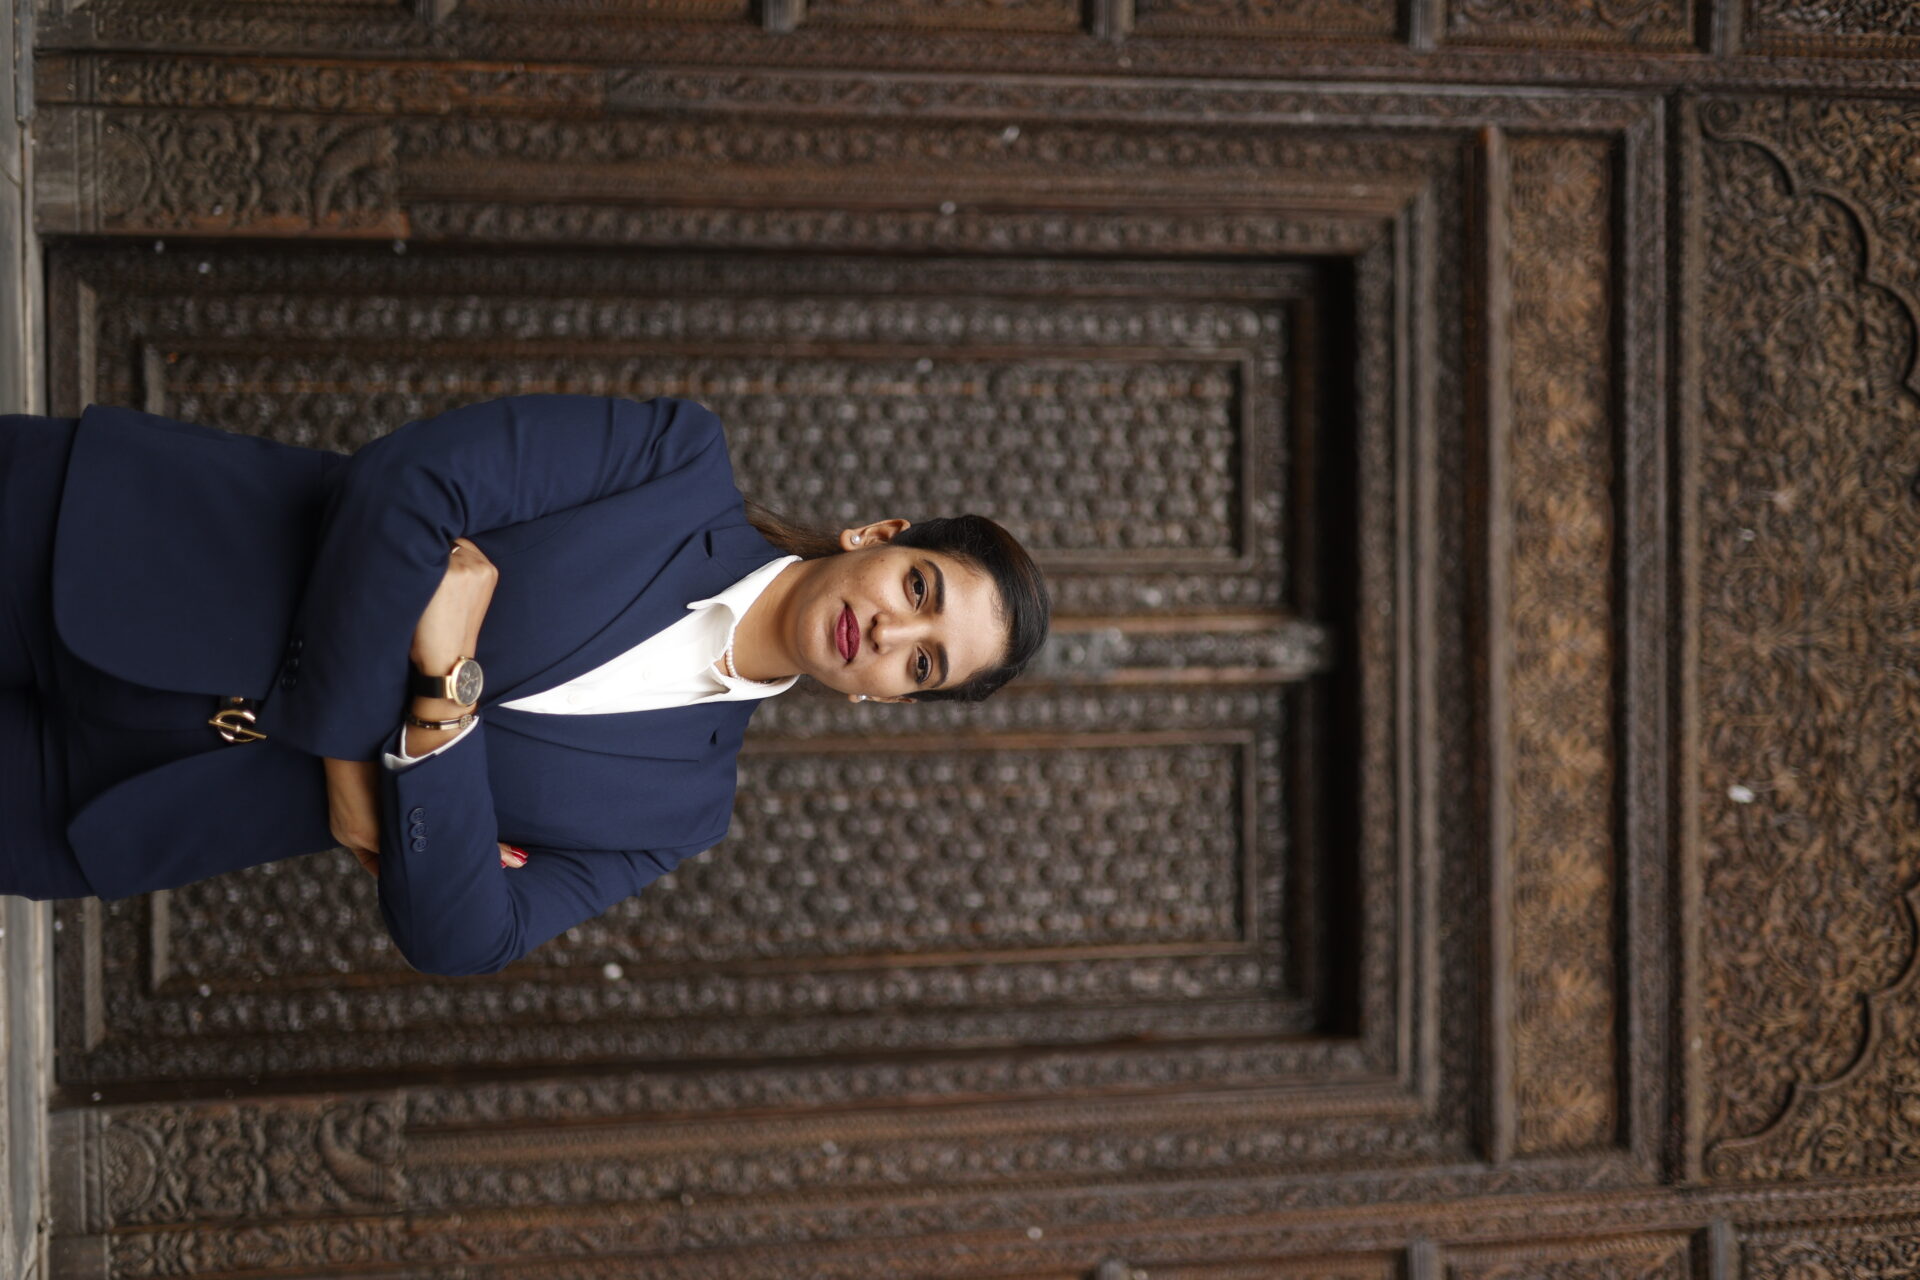 Fairmont Jaipur Appointed Shahnaaz Anjum as the Director of Food & Beverage